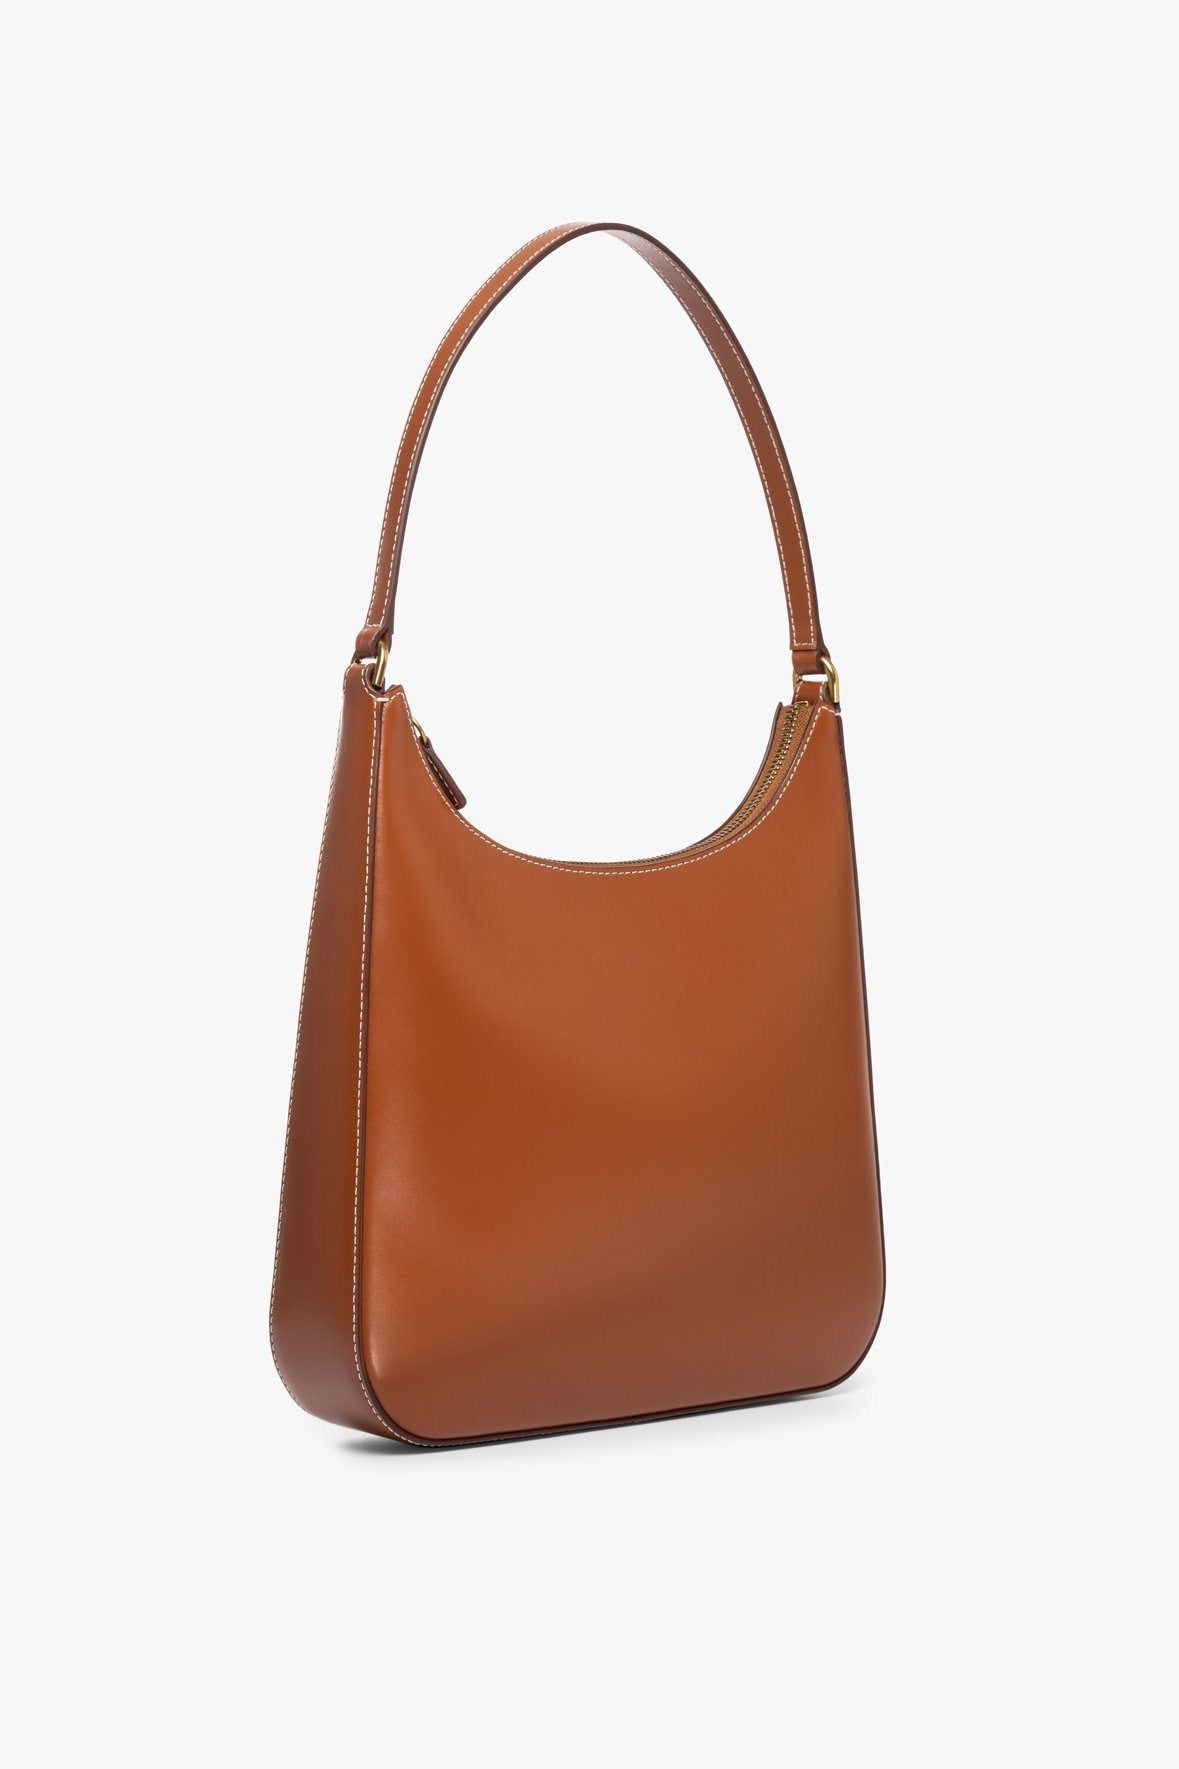 STAUD, Shirley Leather Bag for Female in Walnut Ostrich Embossed